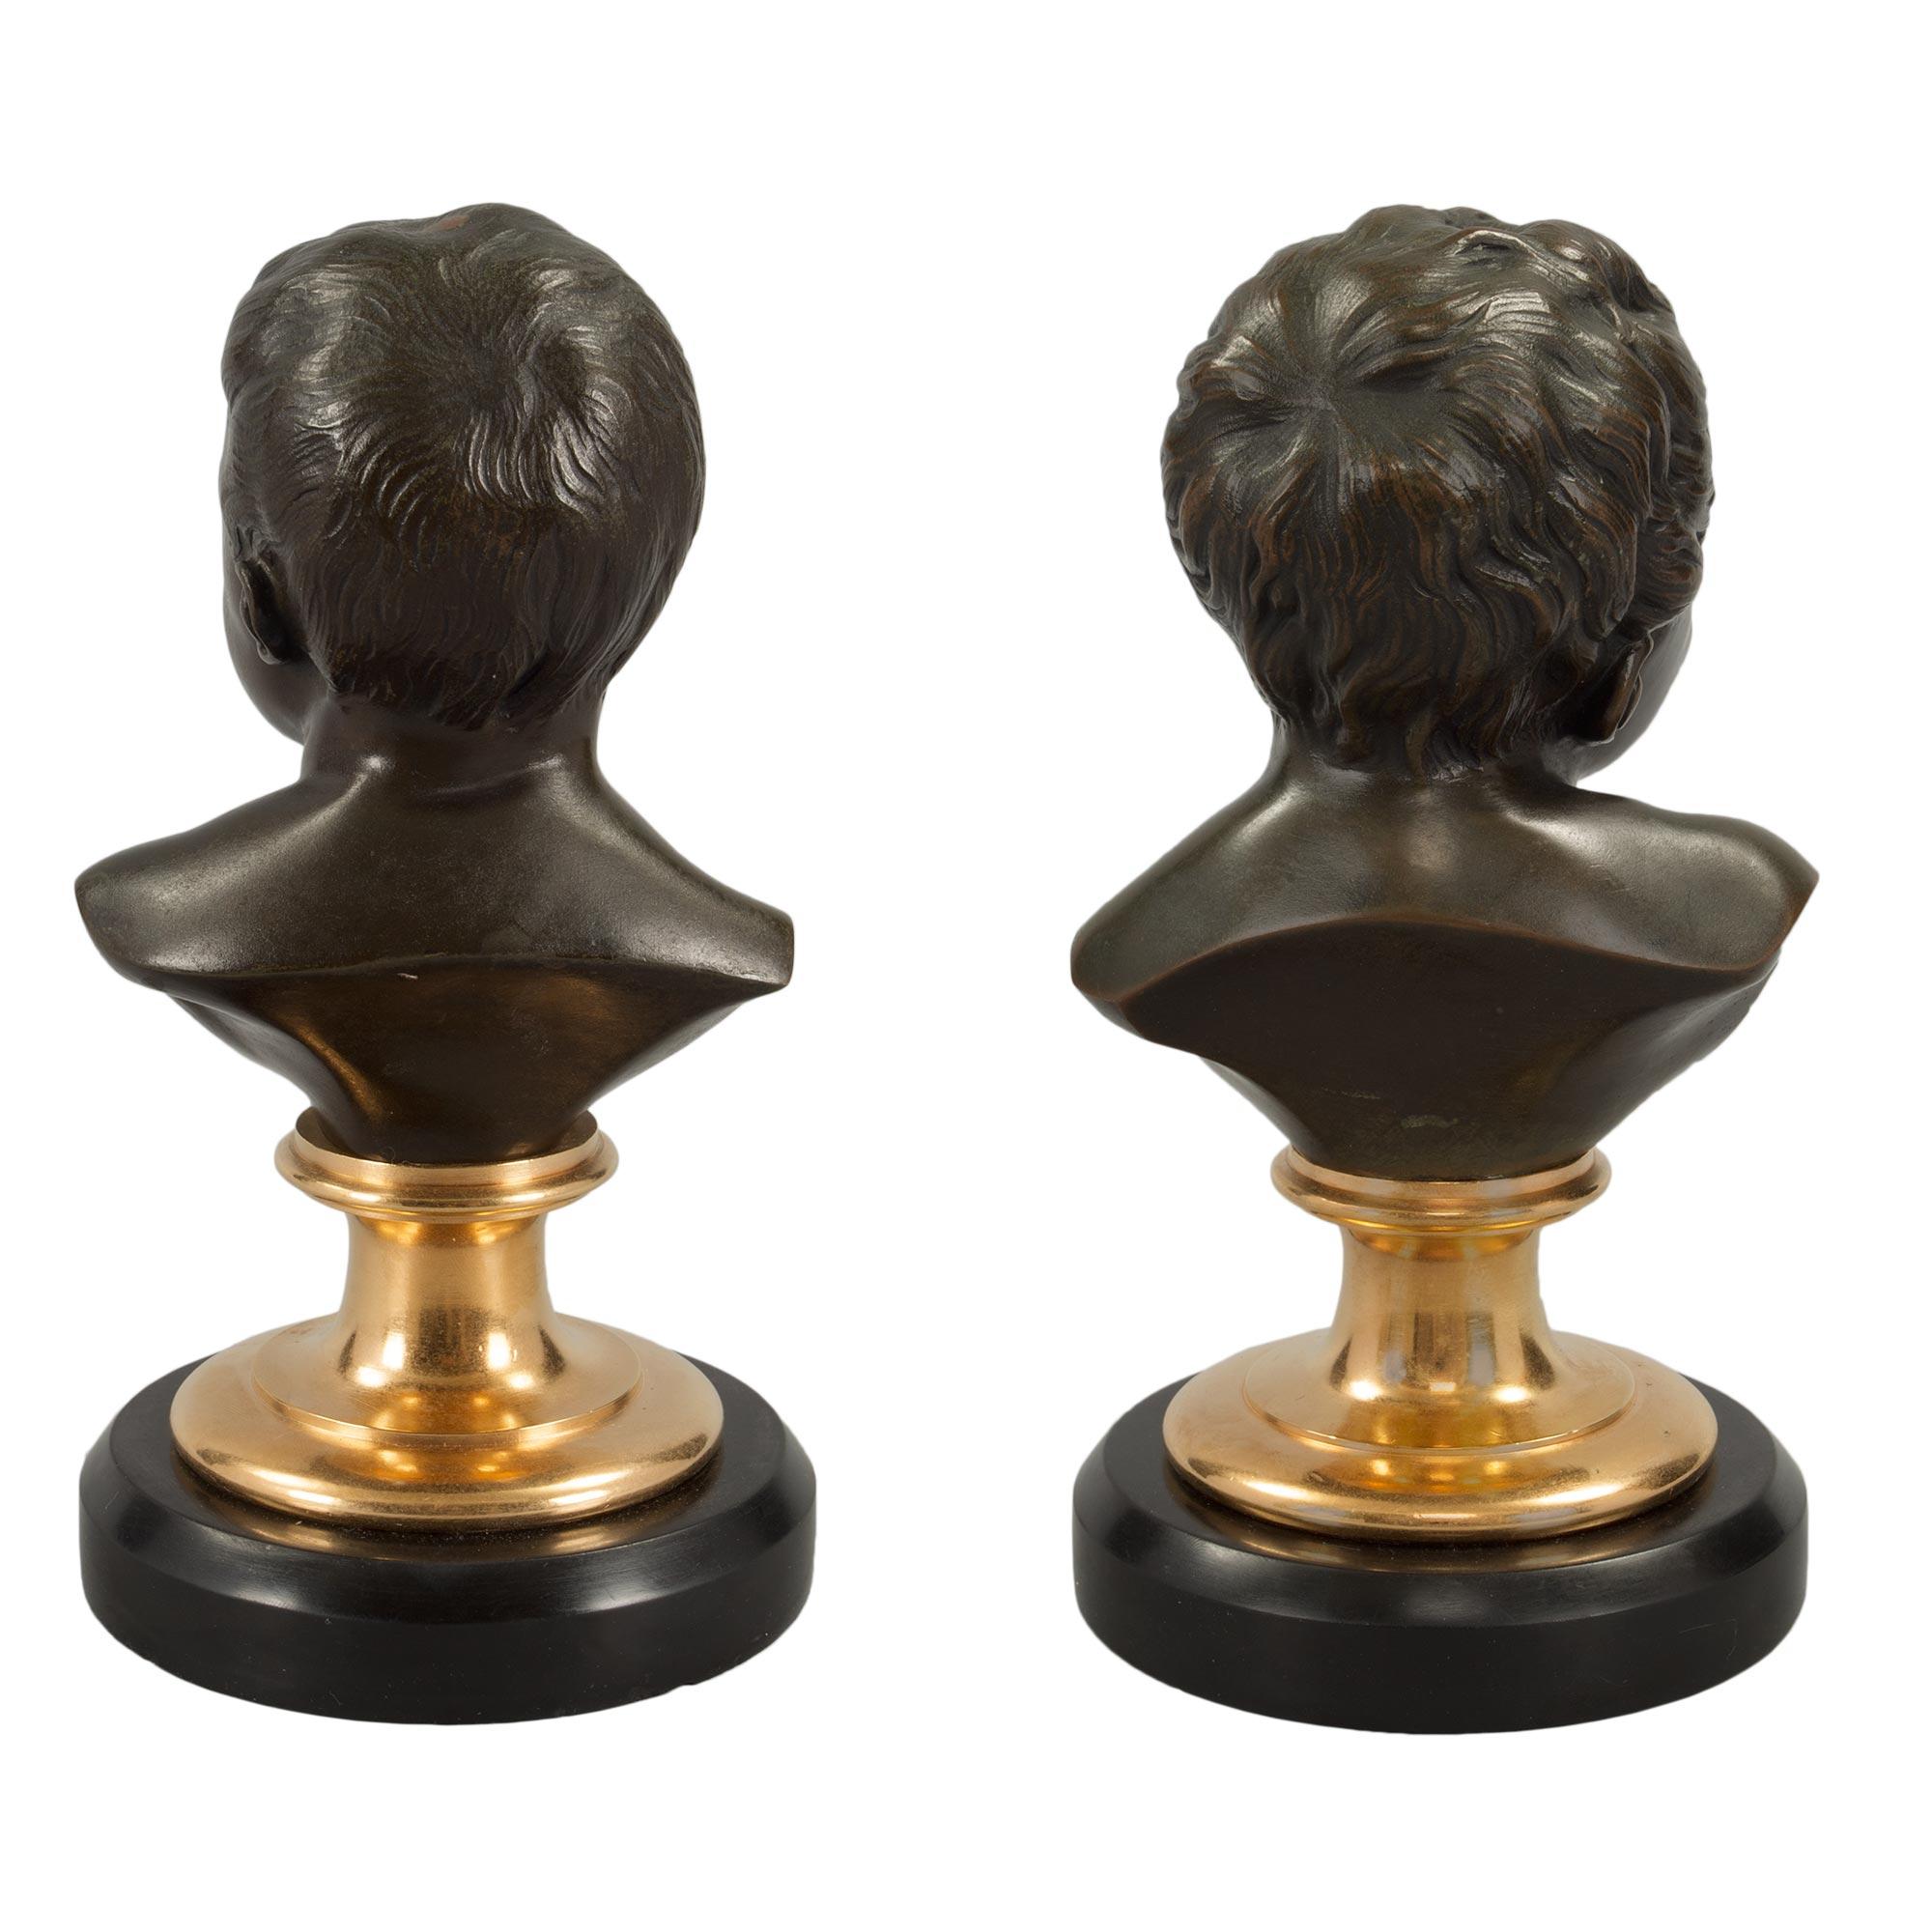 Pair of French 19th Century Louis XVI Style Marble, Ormolu and Bronze In Good Condition For Sale In West Palm Beach, FL